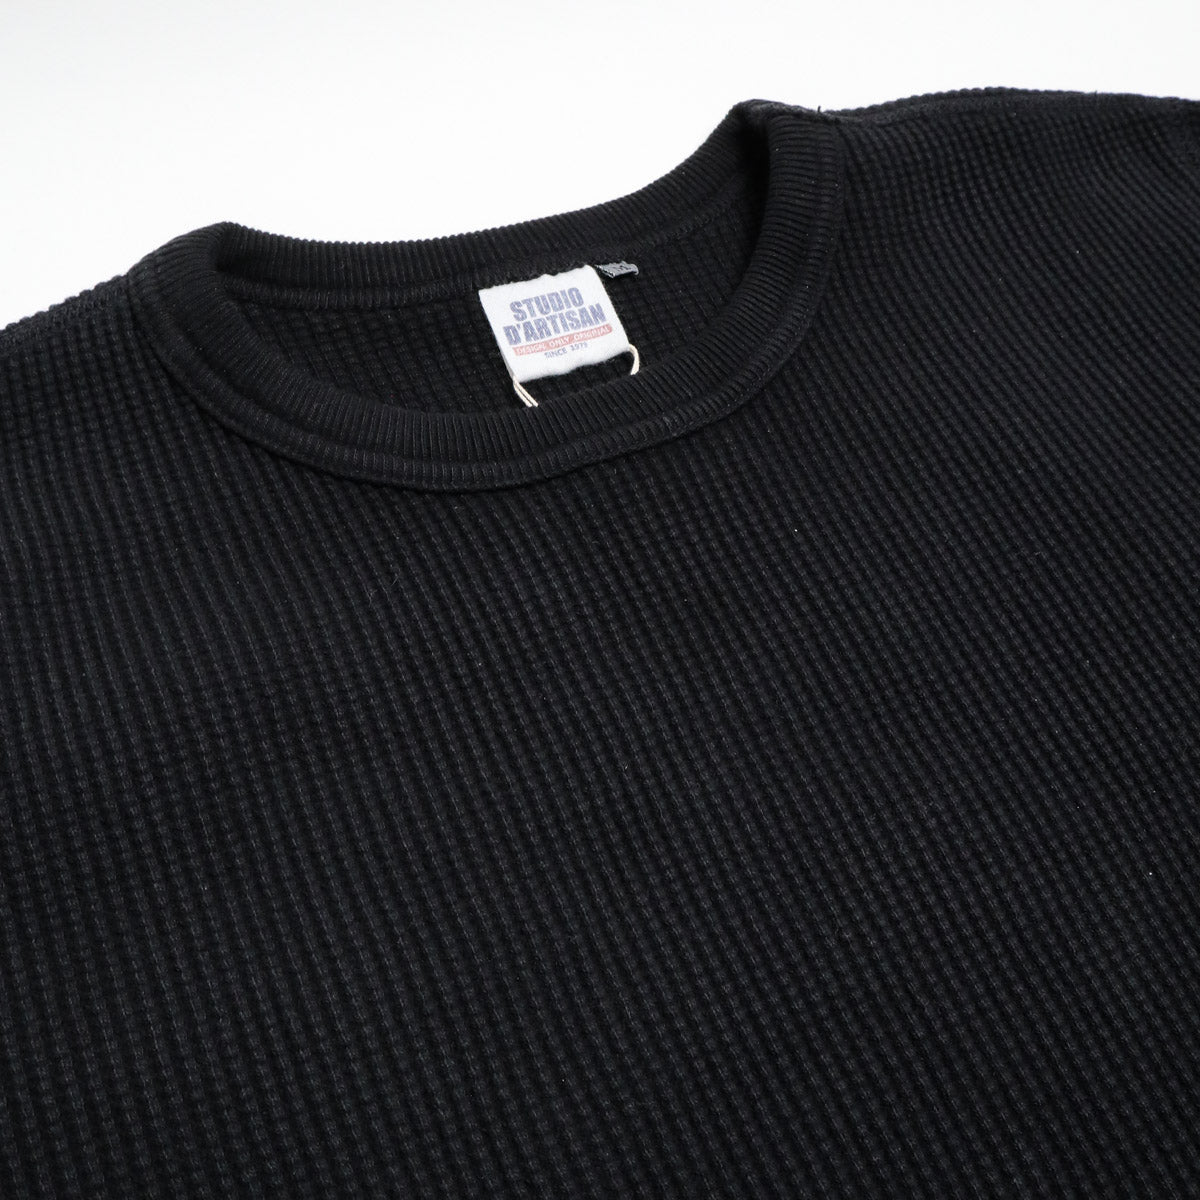 Men's Classic Waffle-Knit Heavy Thermal Top 2XL, Black 